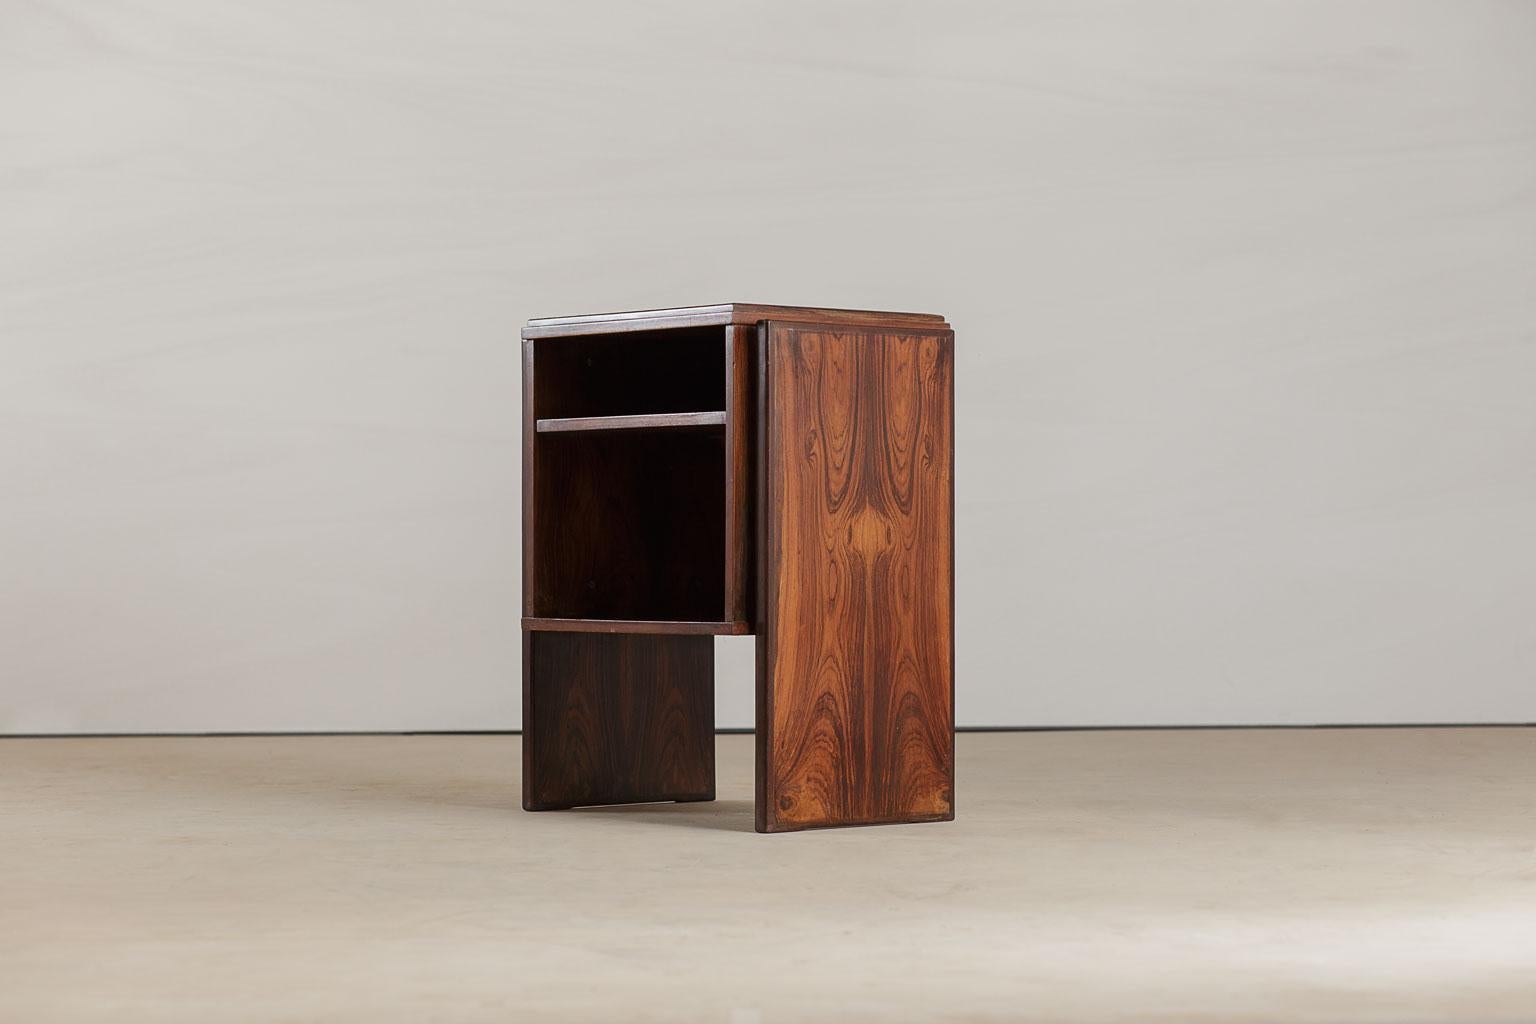 Vintage rosewood end tables designed by Brazil’s Joaquim Tenreiro. This desk came from the
Bloch, Editores headquarters, a building designed by Oscar Niemeyer and with interiors furnished by Sergio Rodrigues and Joaquim Tenreiro.

The tables can